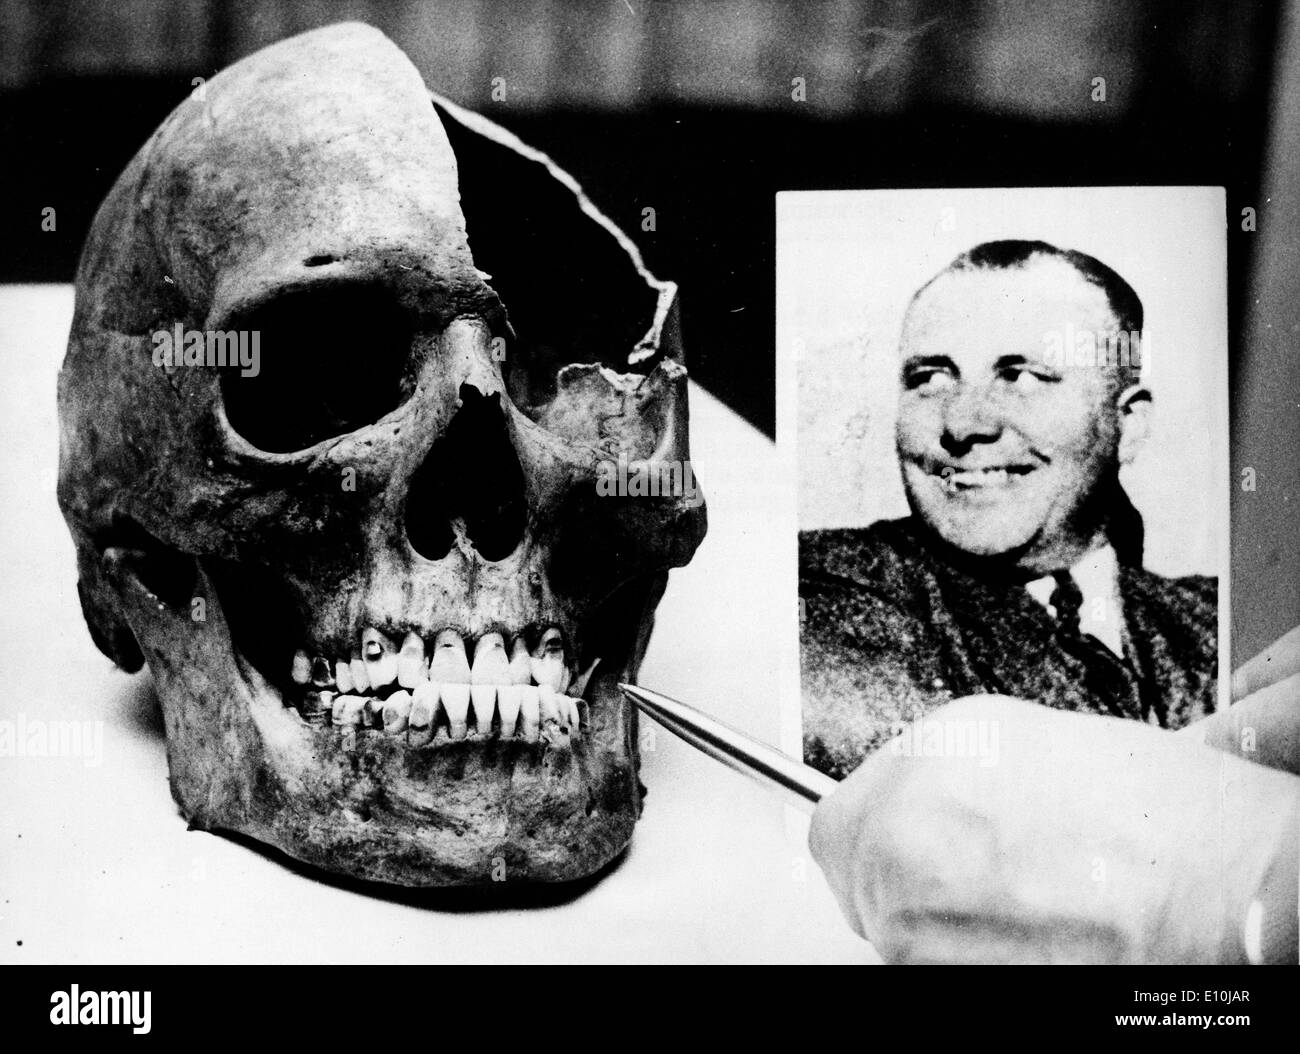 Two bones, a skull and upper thigh, were found in excavations in Berlin's Lehrt Station. Stock Photo